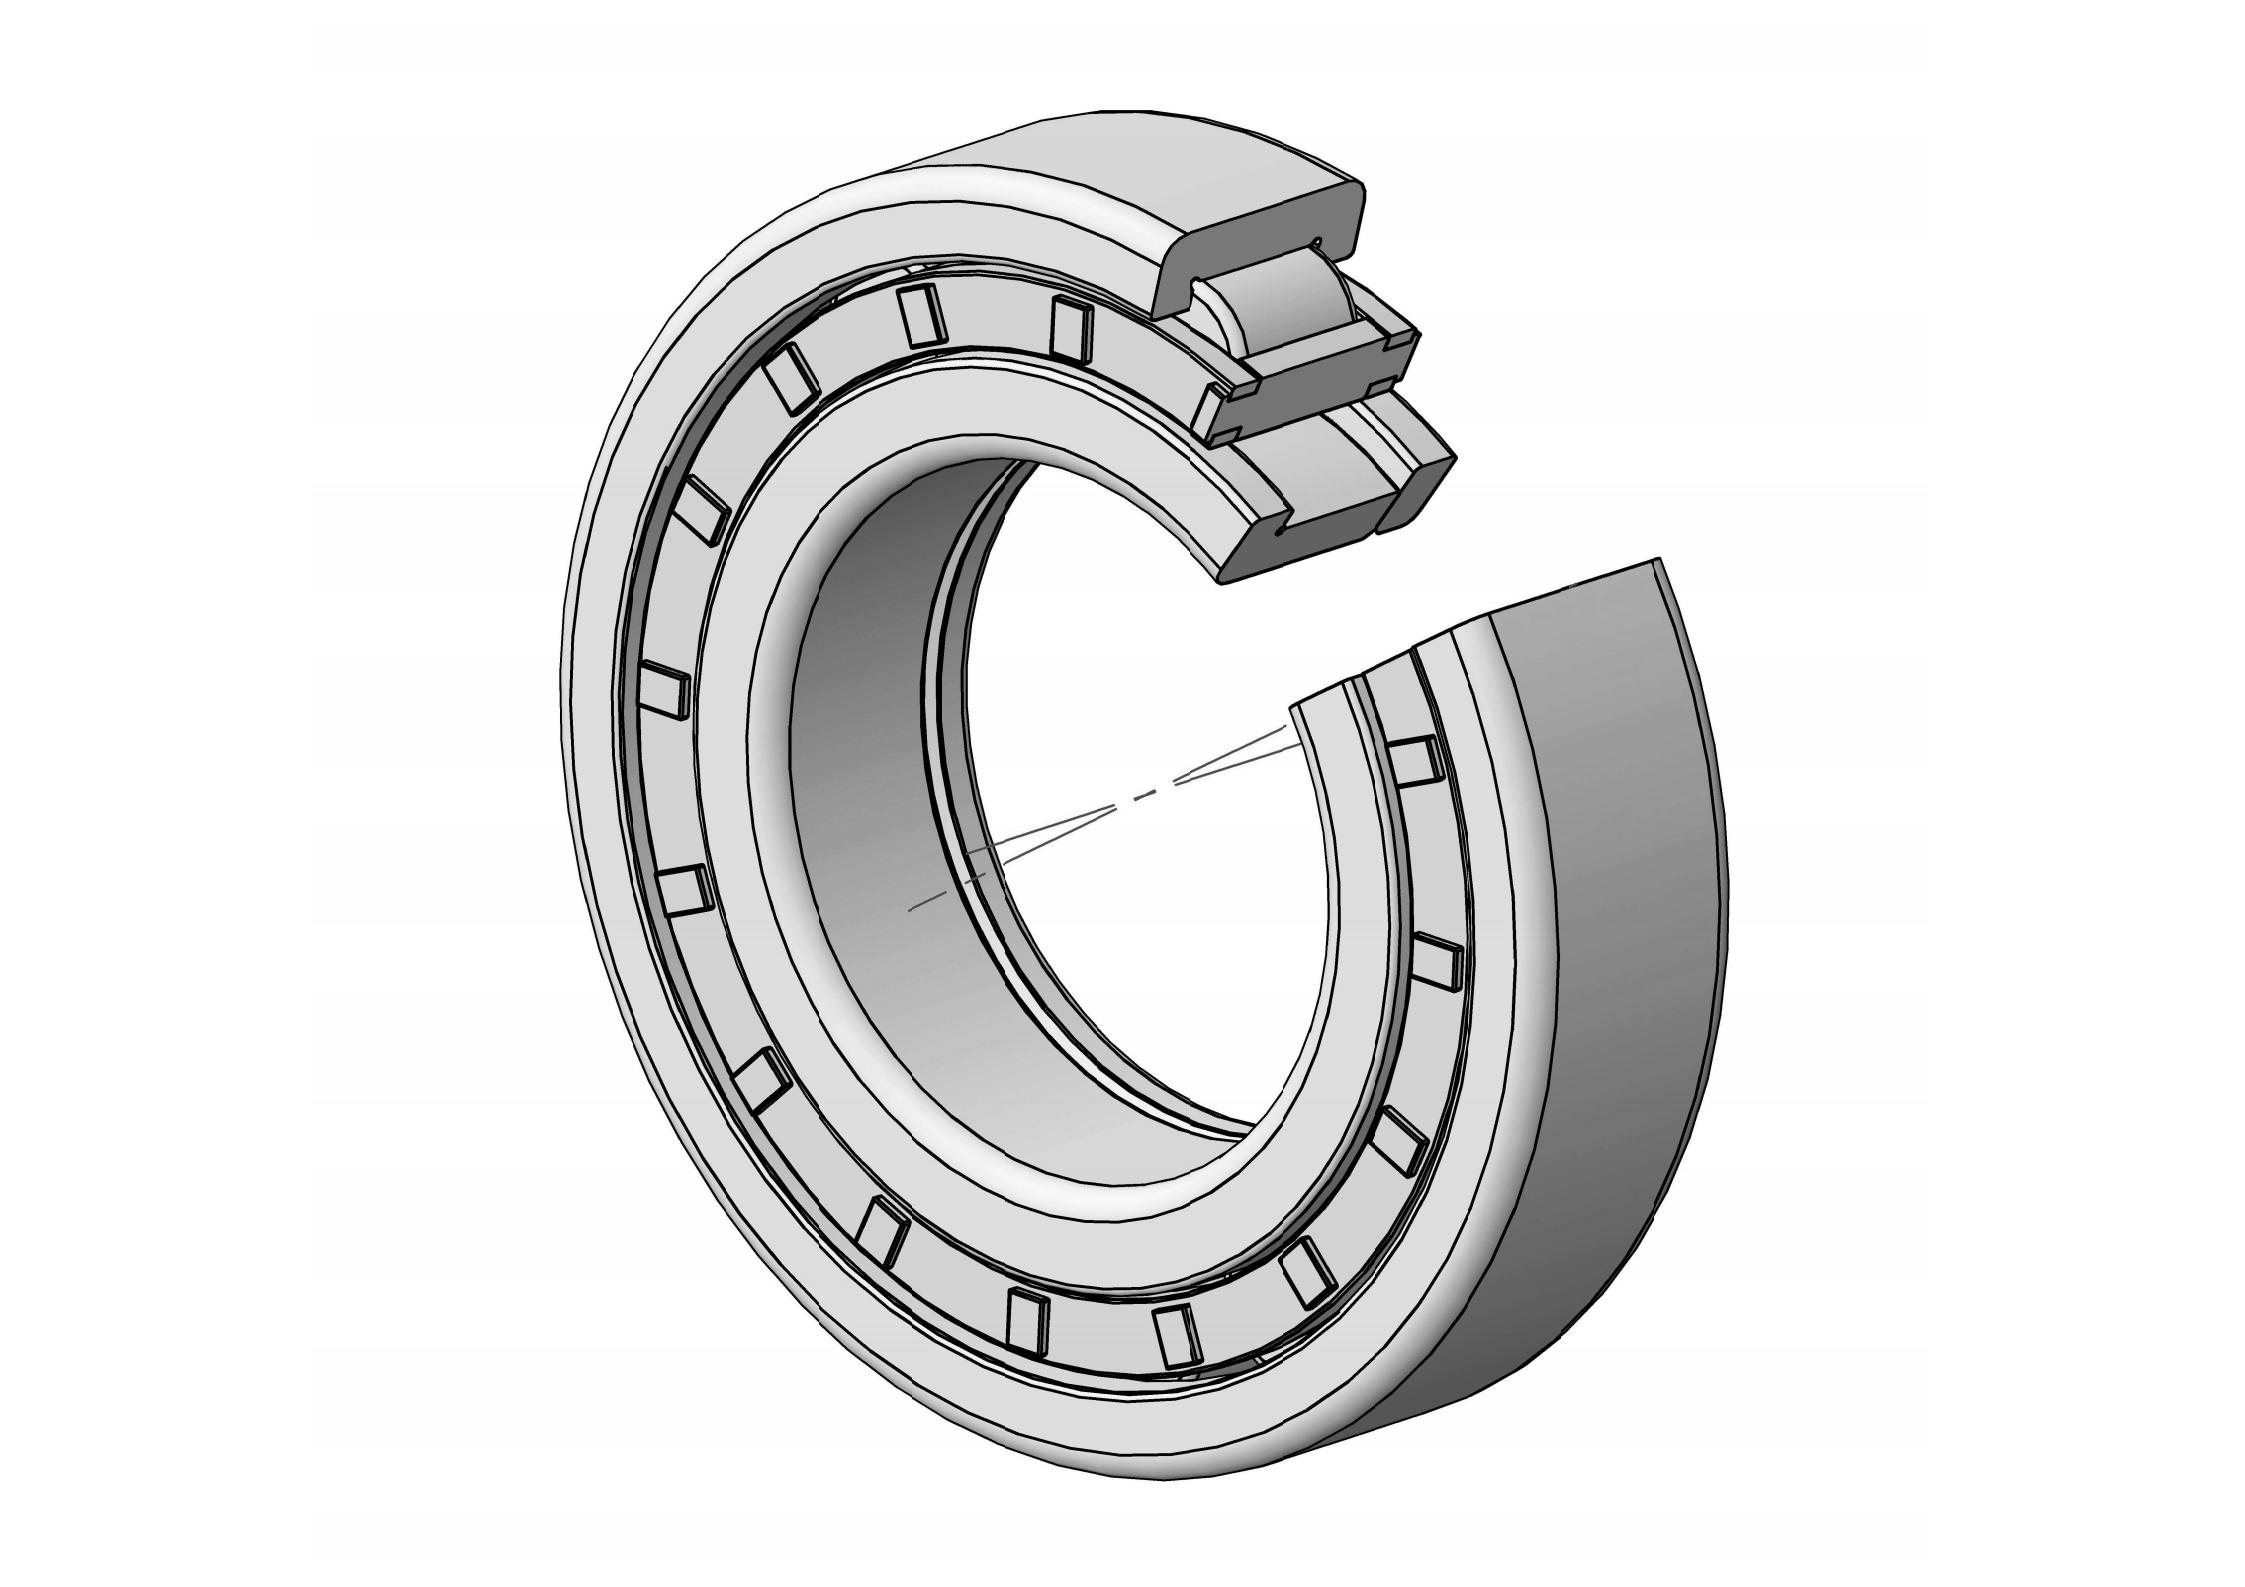 NUP213-E Single Row Cylindrical roller bearing 